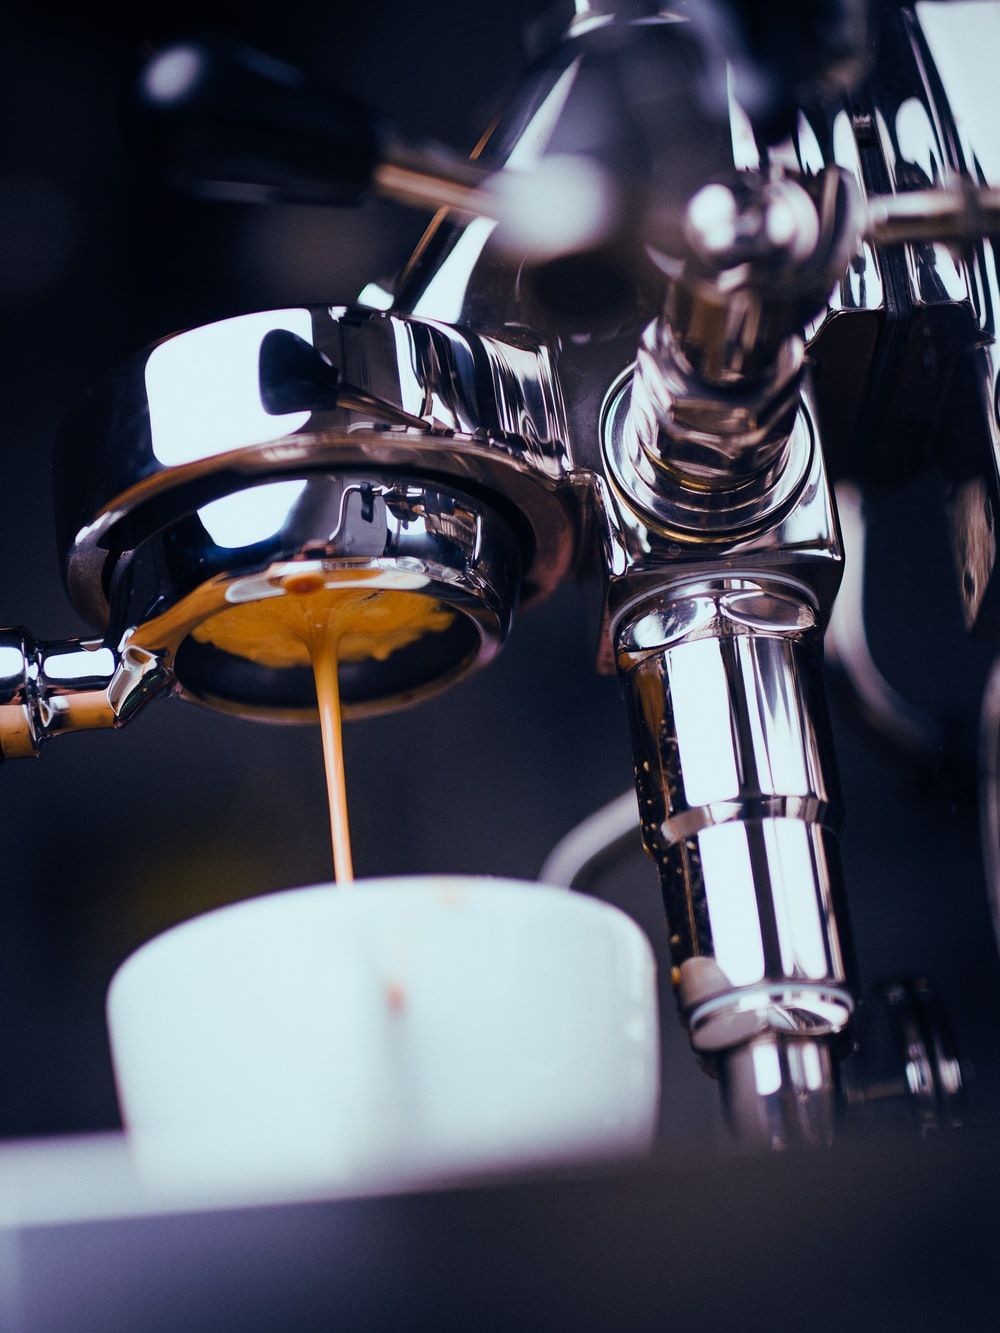 Coffee Barista Picture. Download Free Image